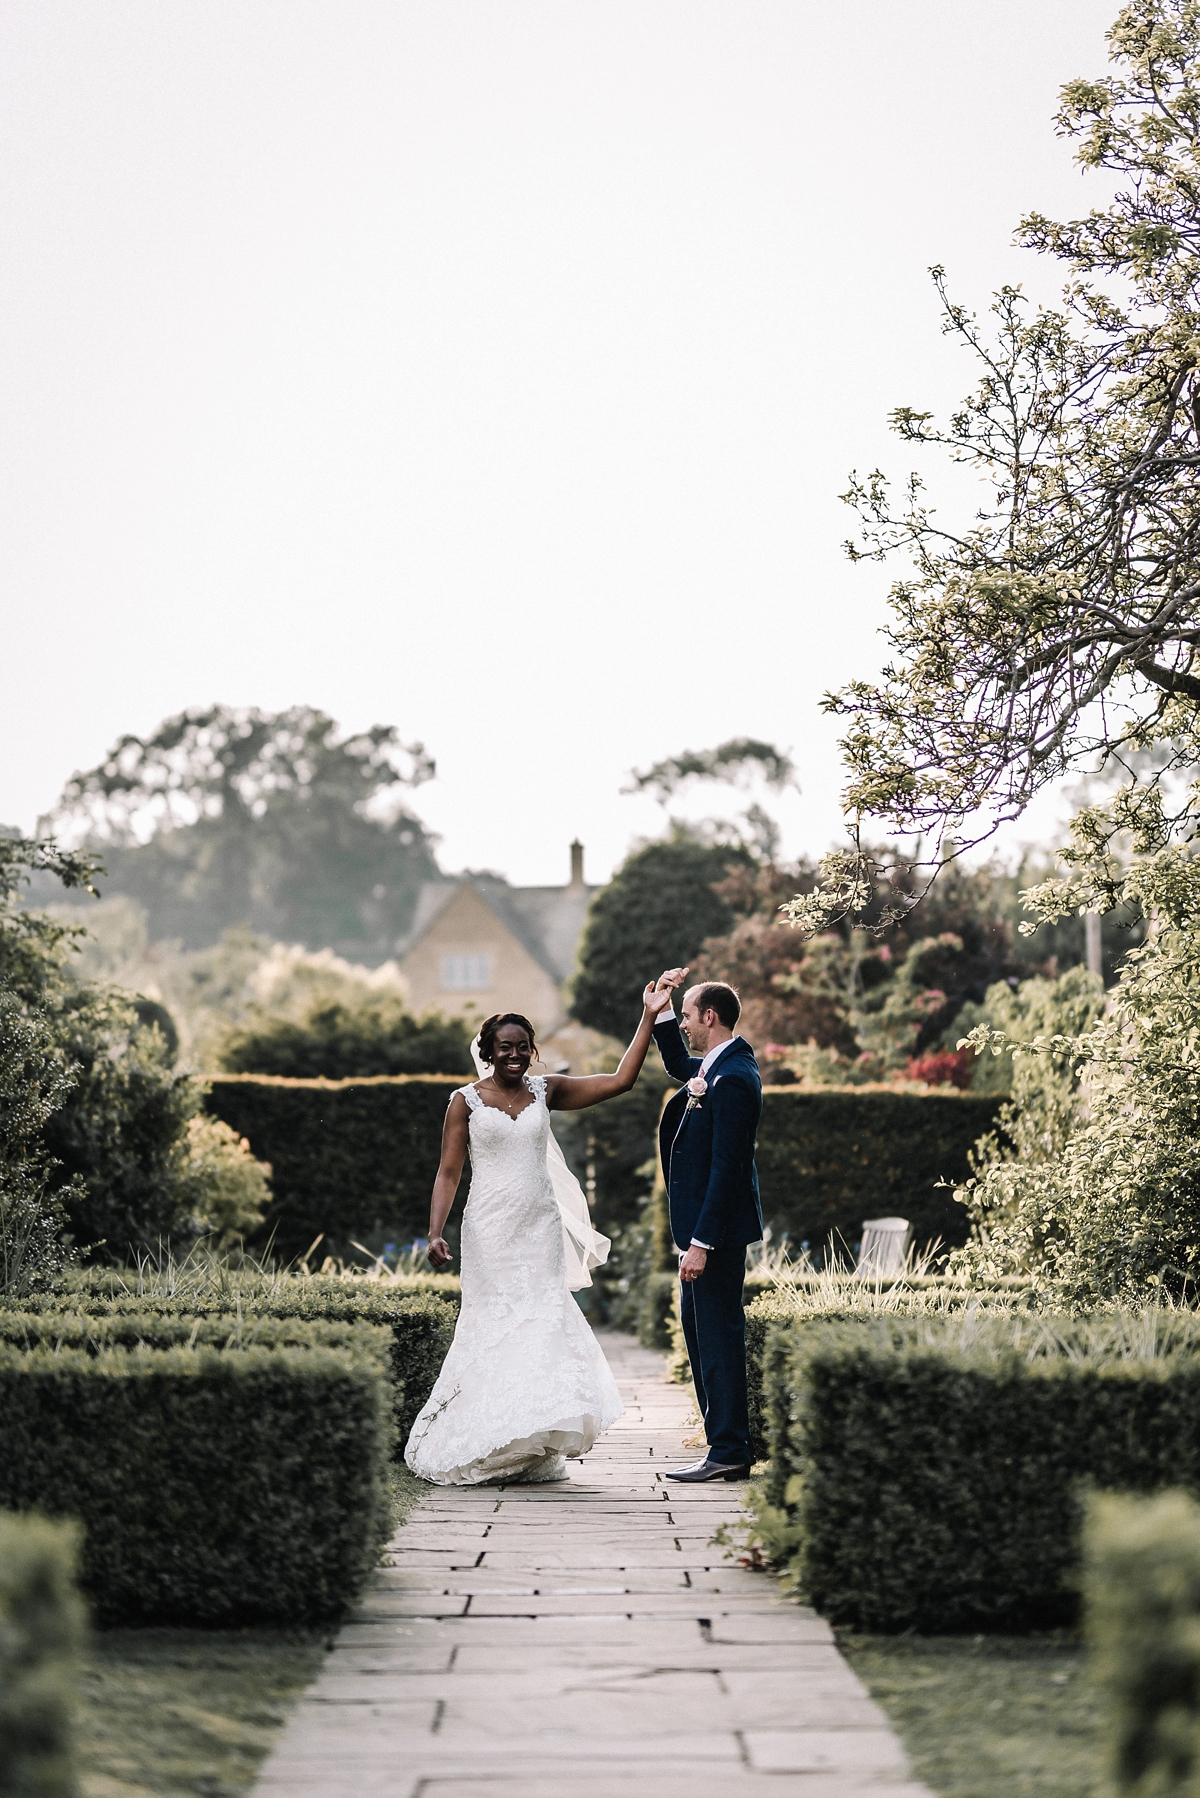 29 A countryside wedding in the Cotswolds